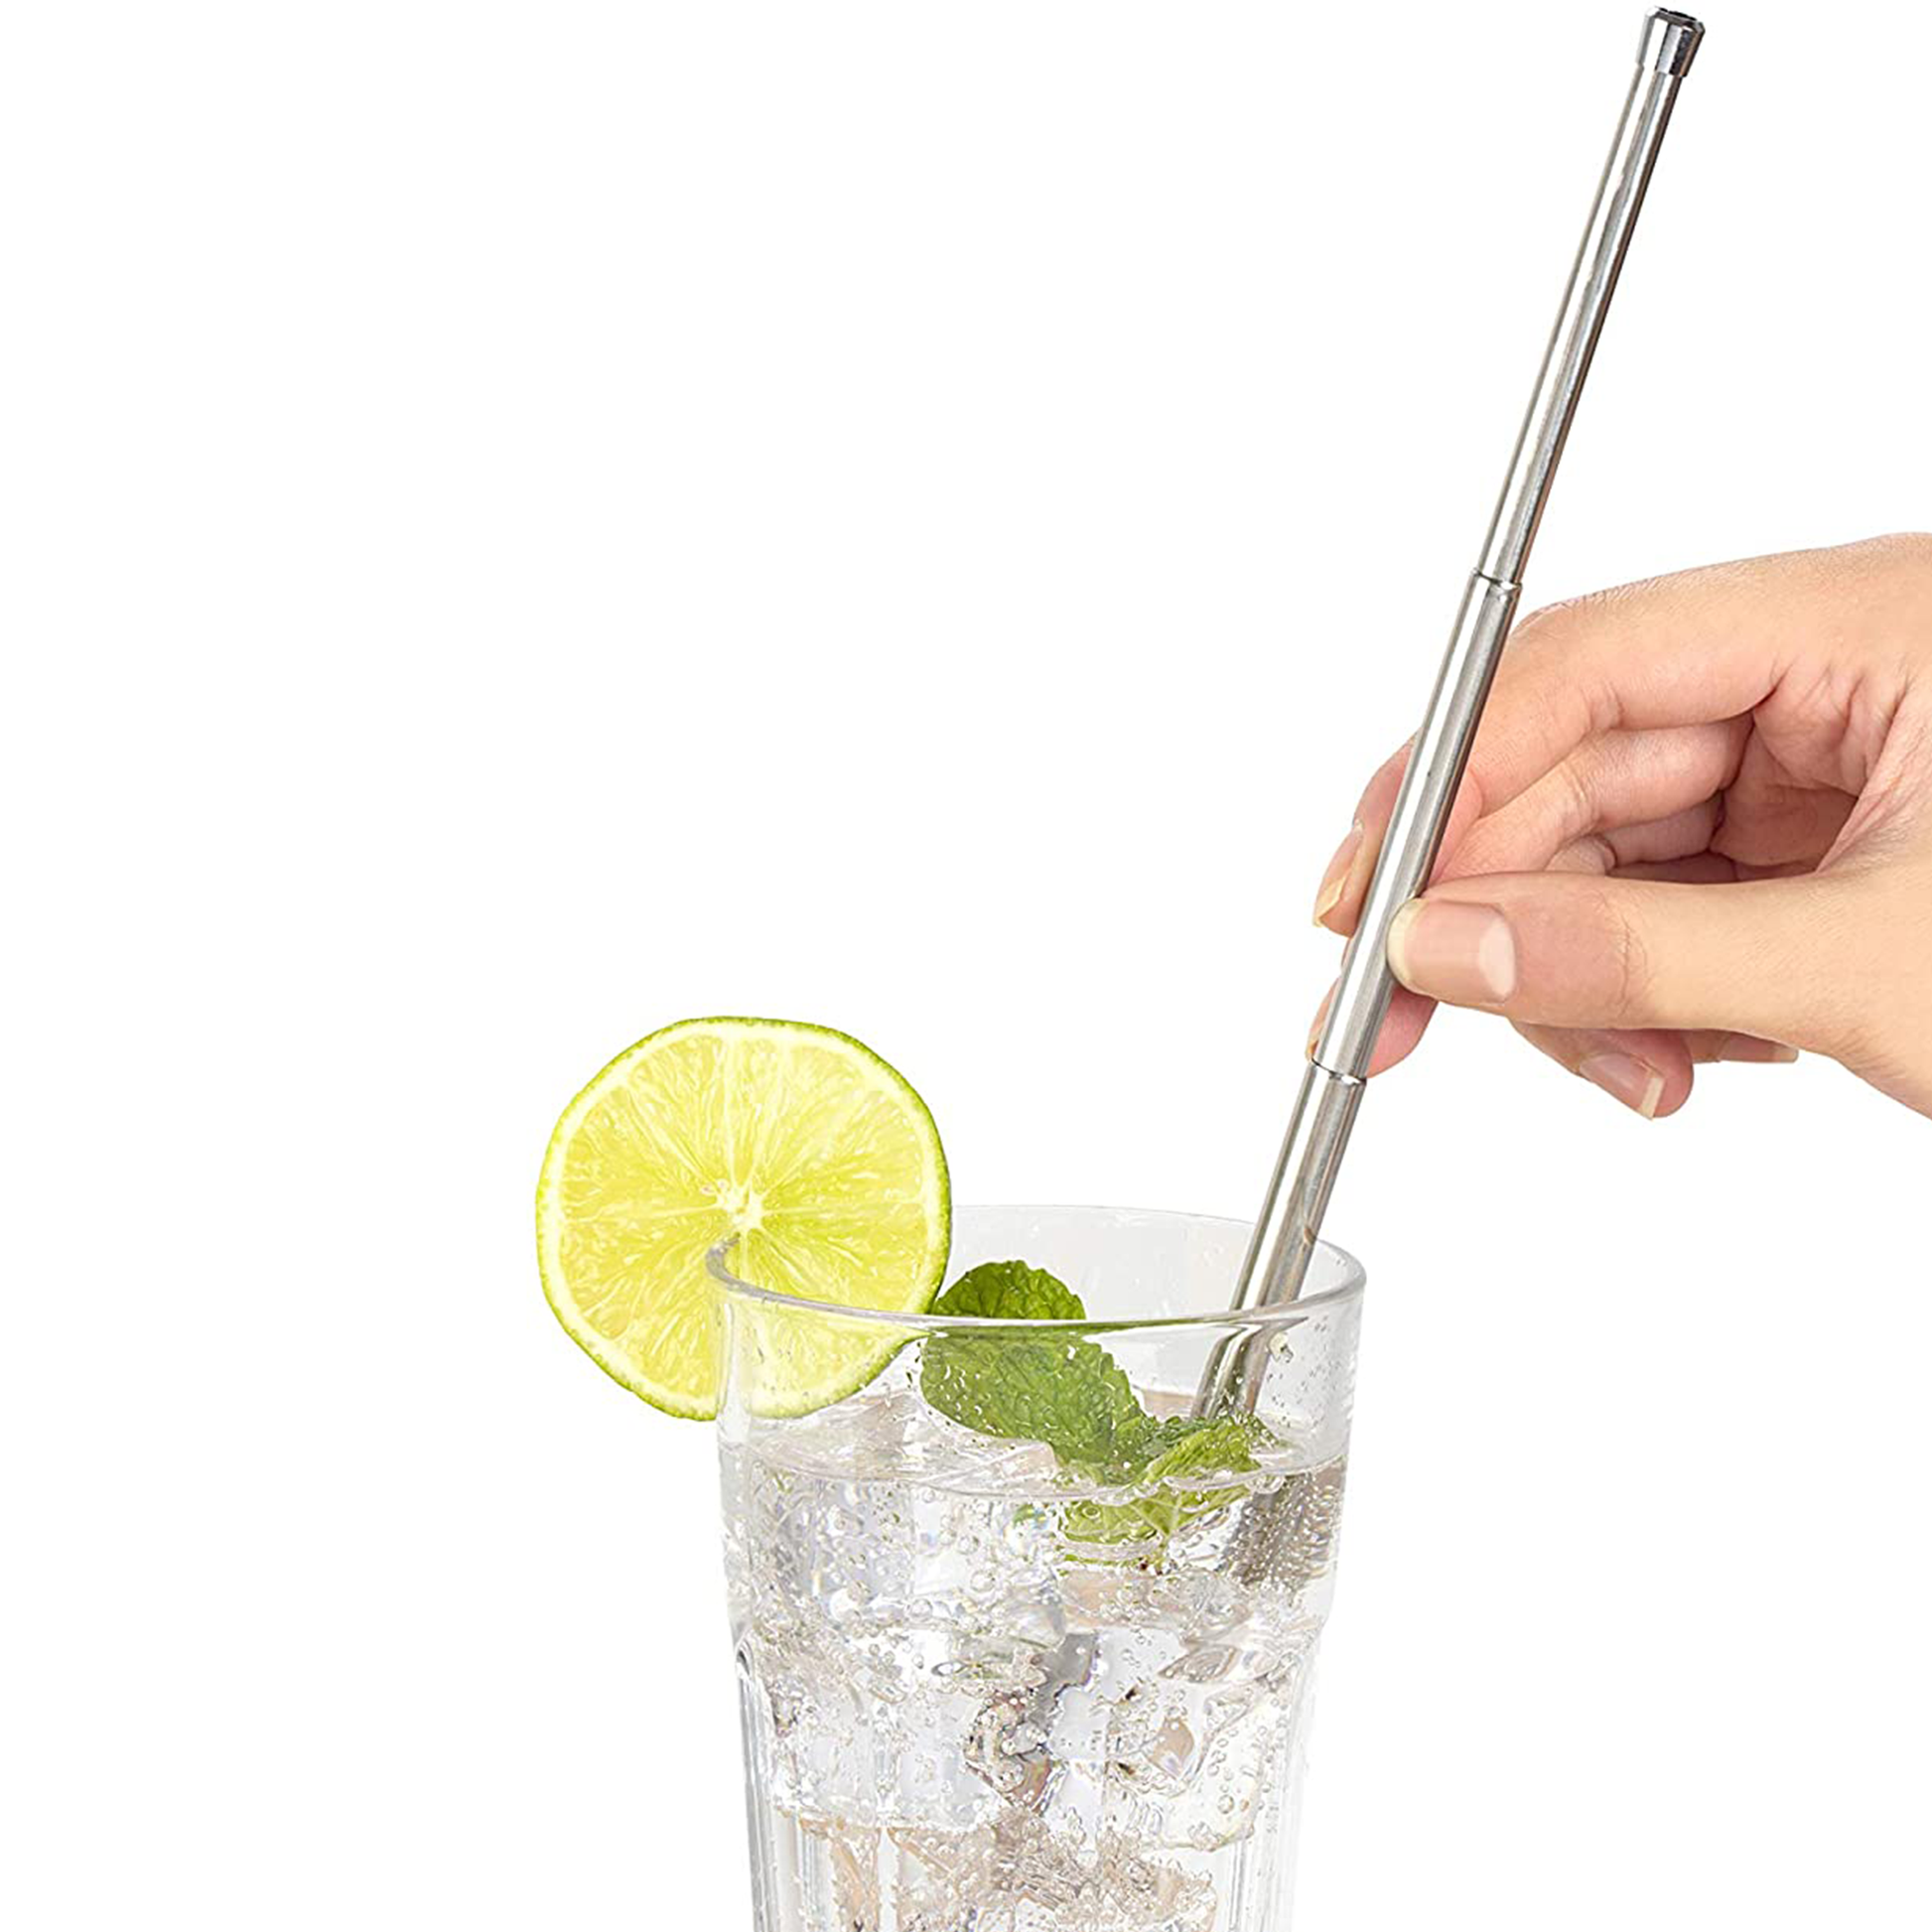 the straw in a drink